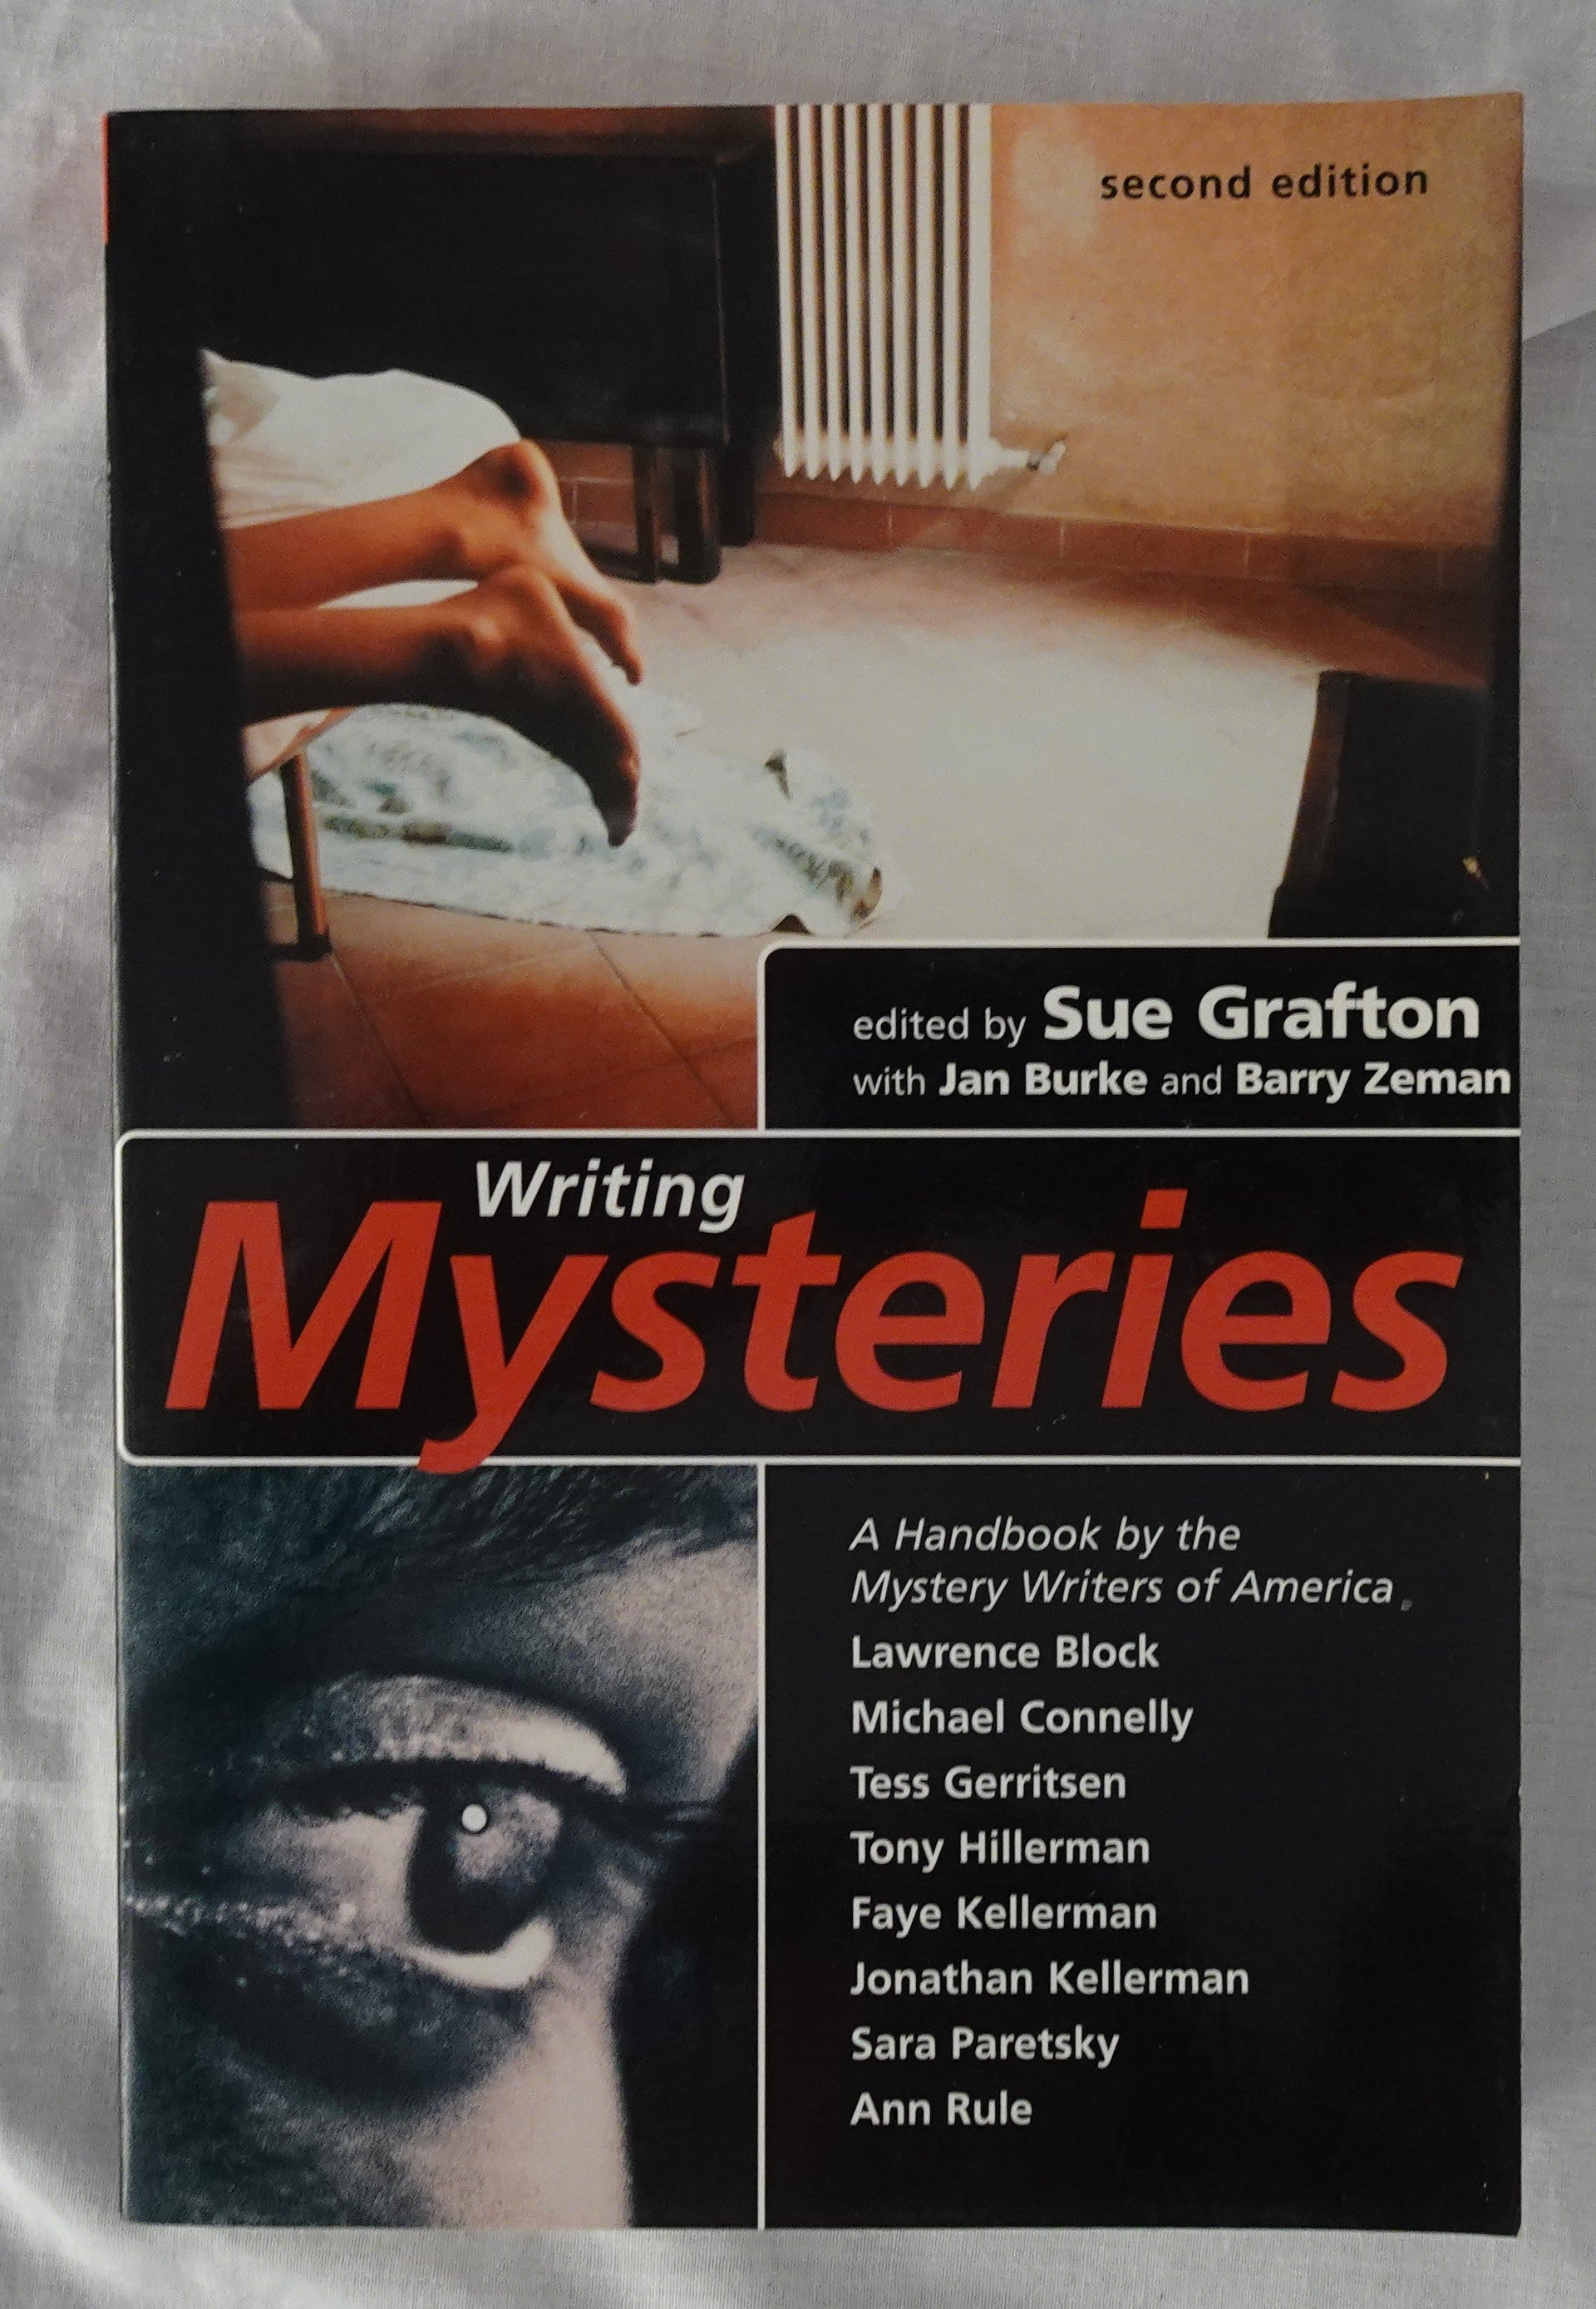 Writing Mysteries  A Handbook by the Mystery Writers of America  Edited by Sue Grafton  with Jan Burke and Barry Zeman